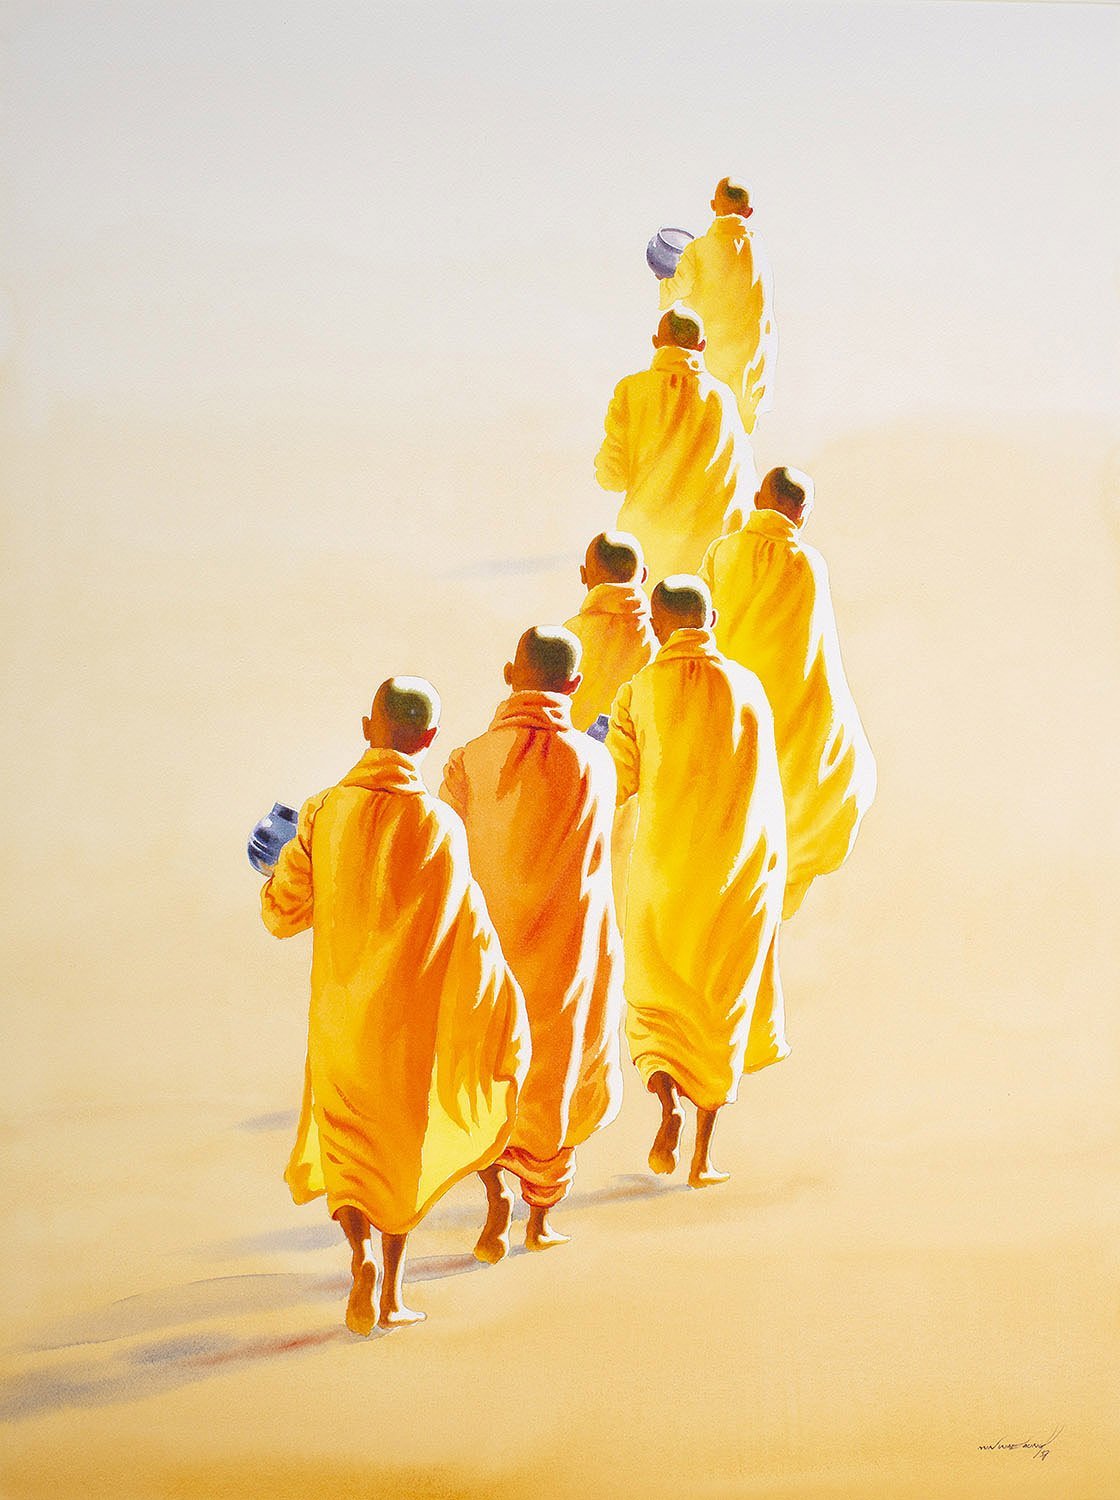 Novices on the morning round|Min Wae Aung- Watercolor on Paper, 2017, 30 x 22 inches